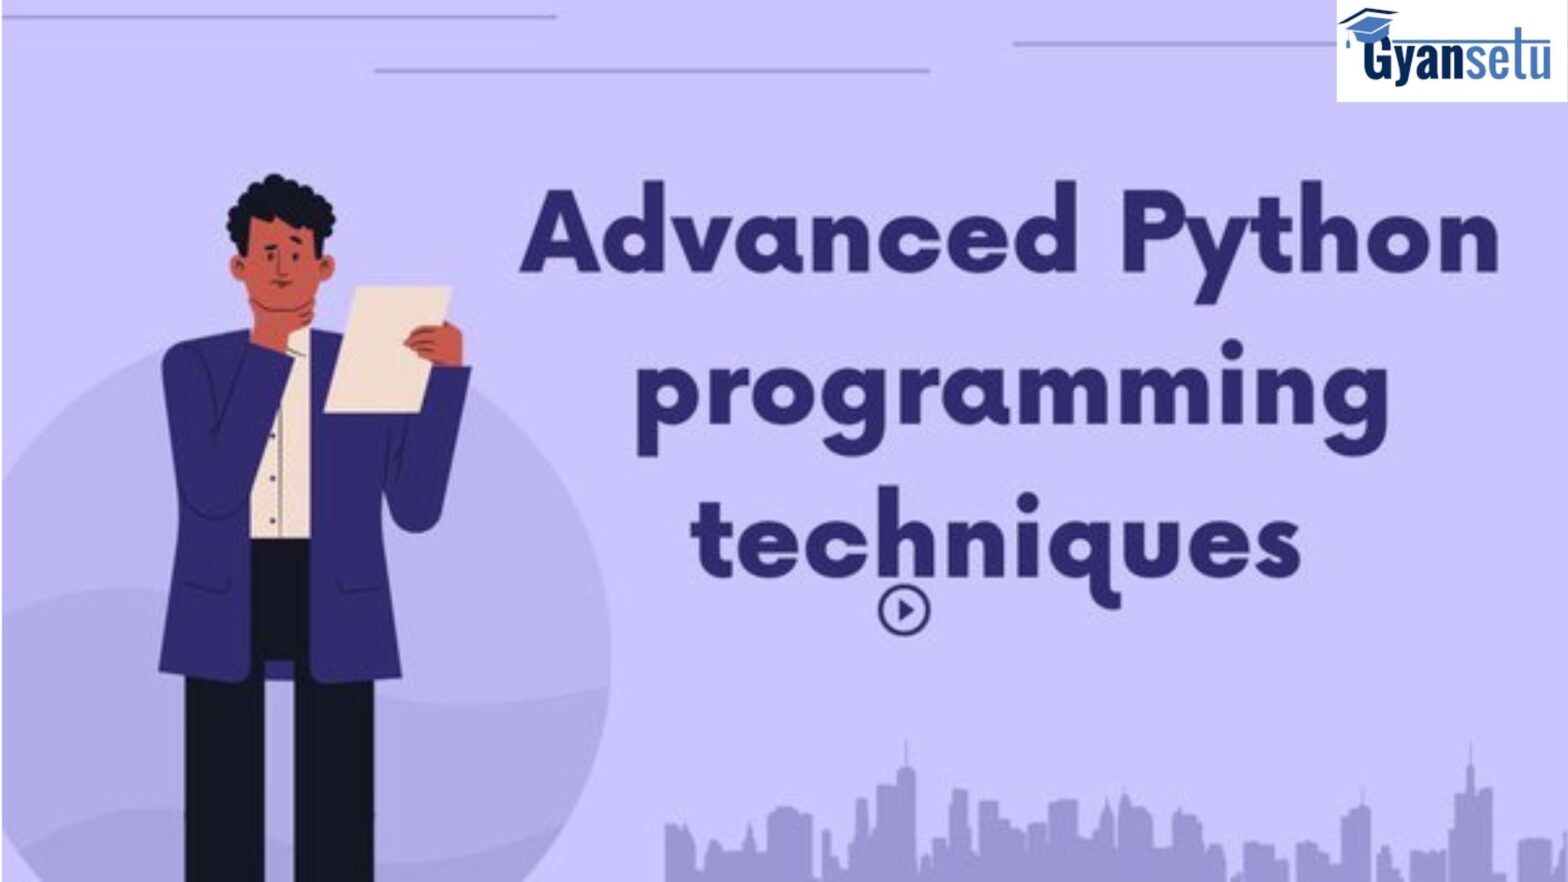 Advanced Python Methods and techniques